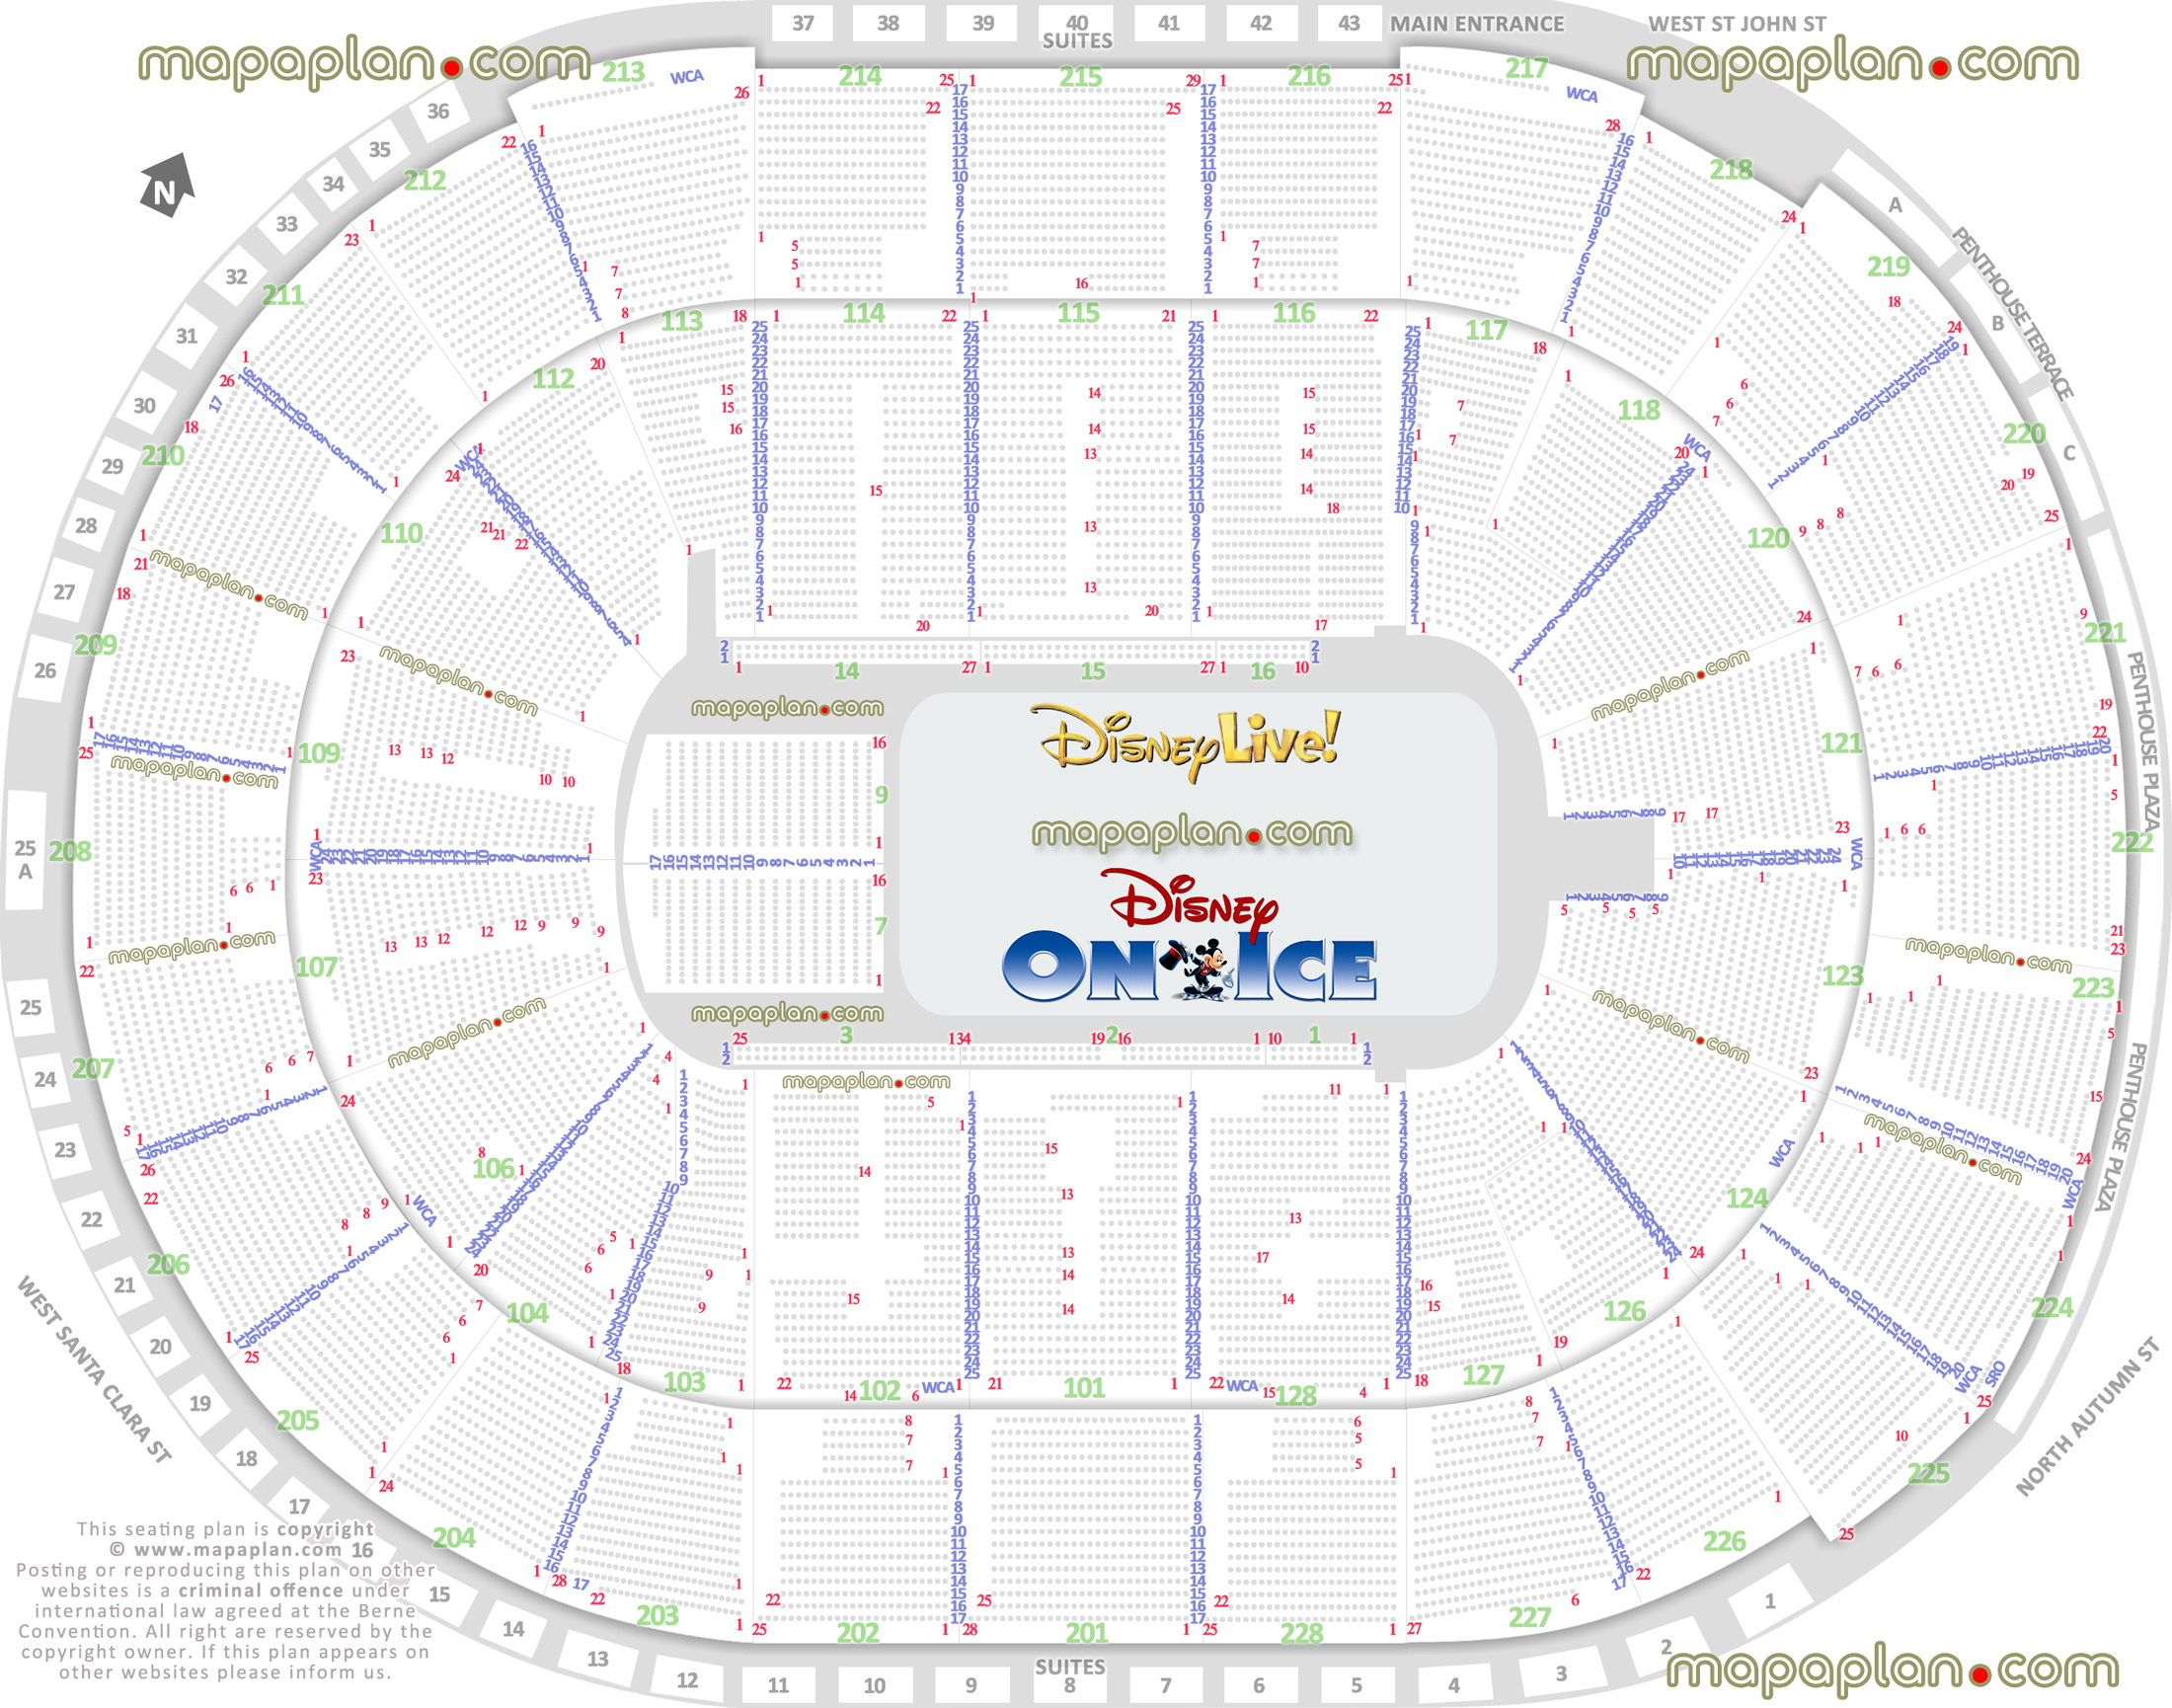 San Jose Sharks Seating Chart With Rows Elcho Table